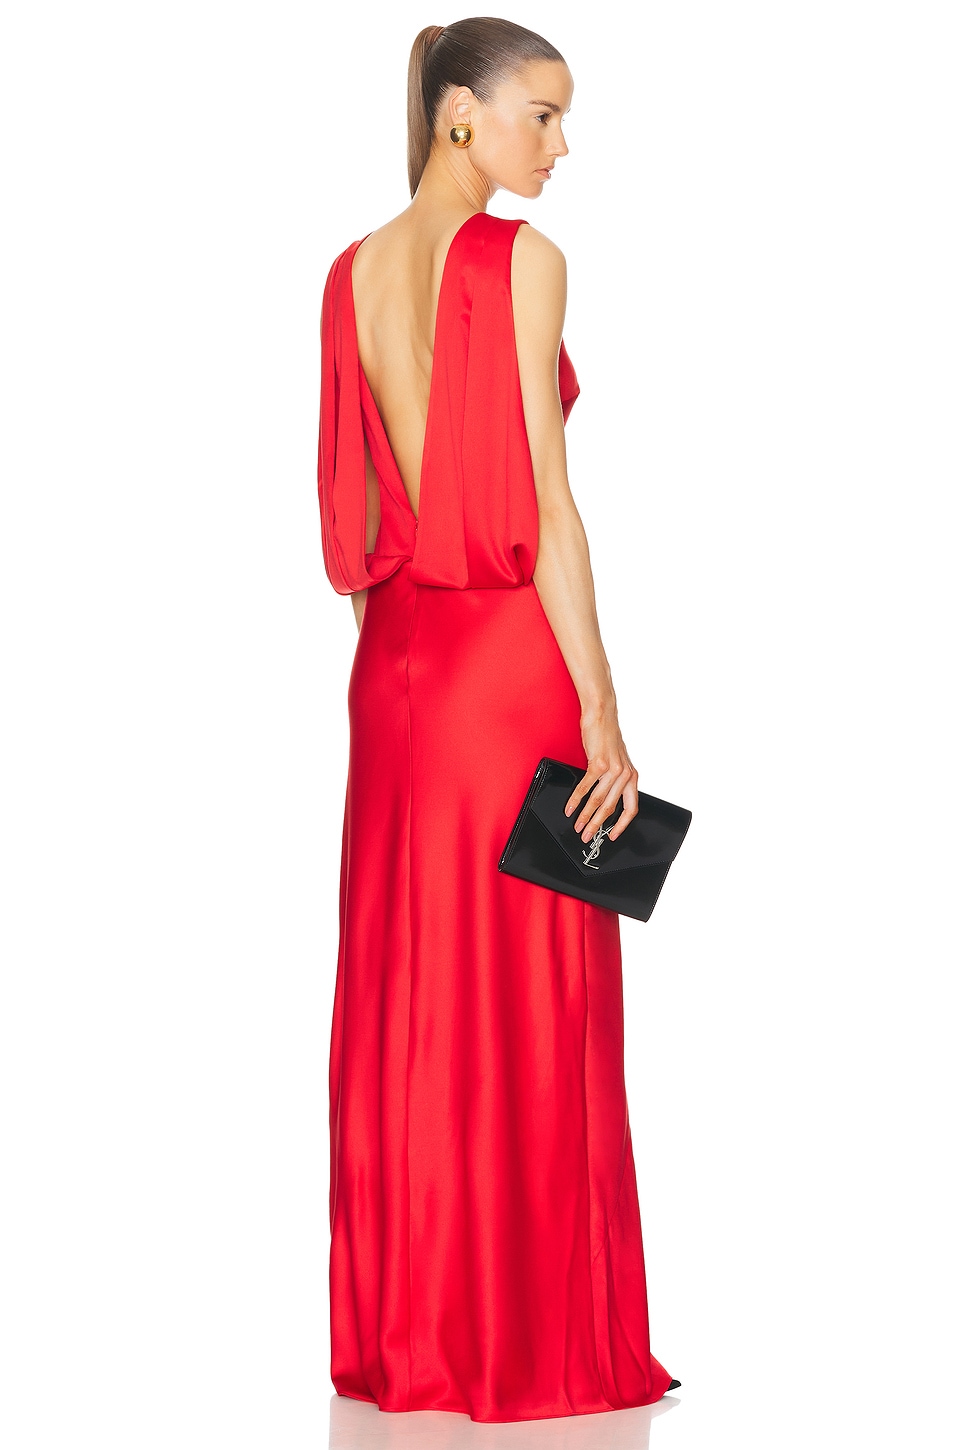 Image 1 of L'Academie by Marianna Thylane Gown in Red